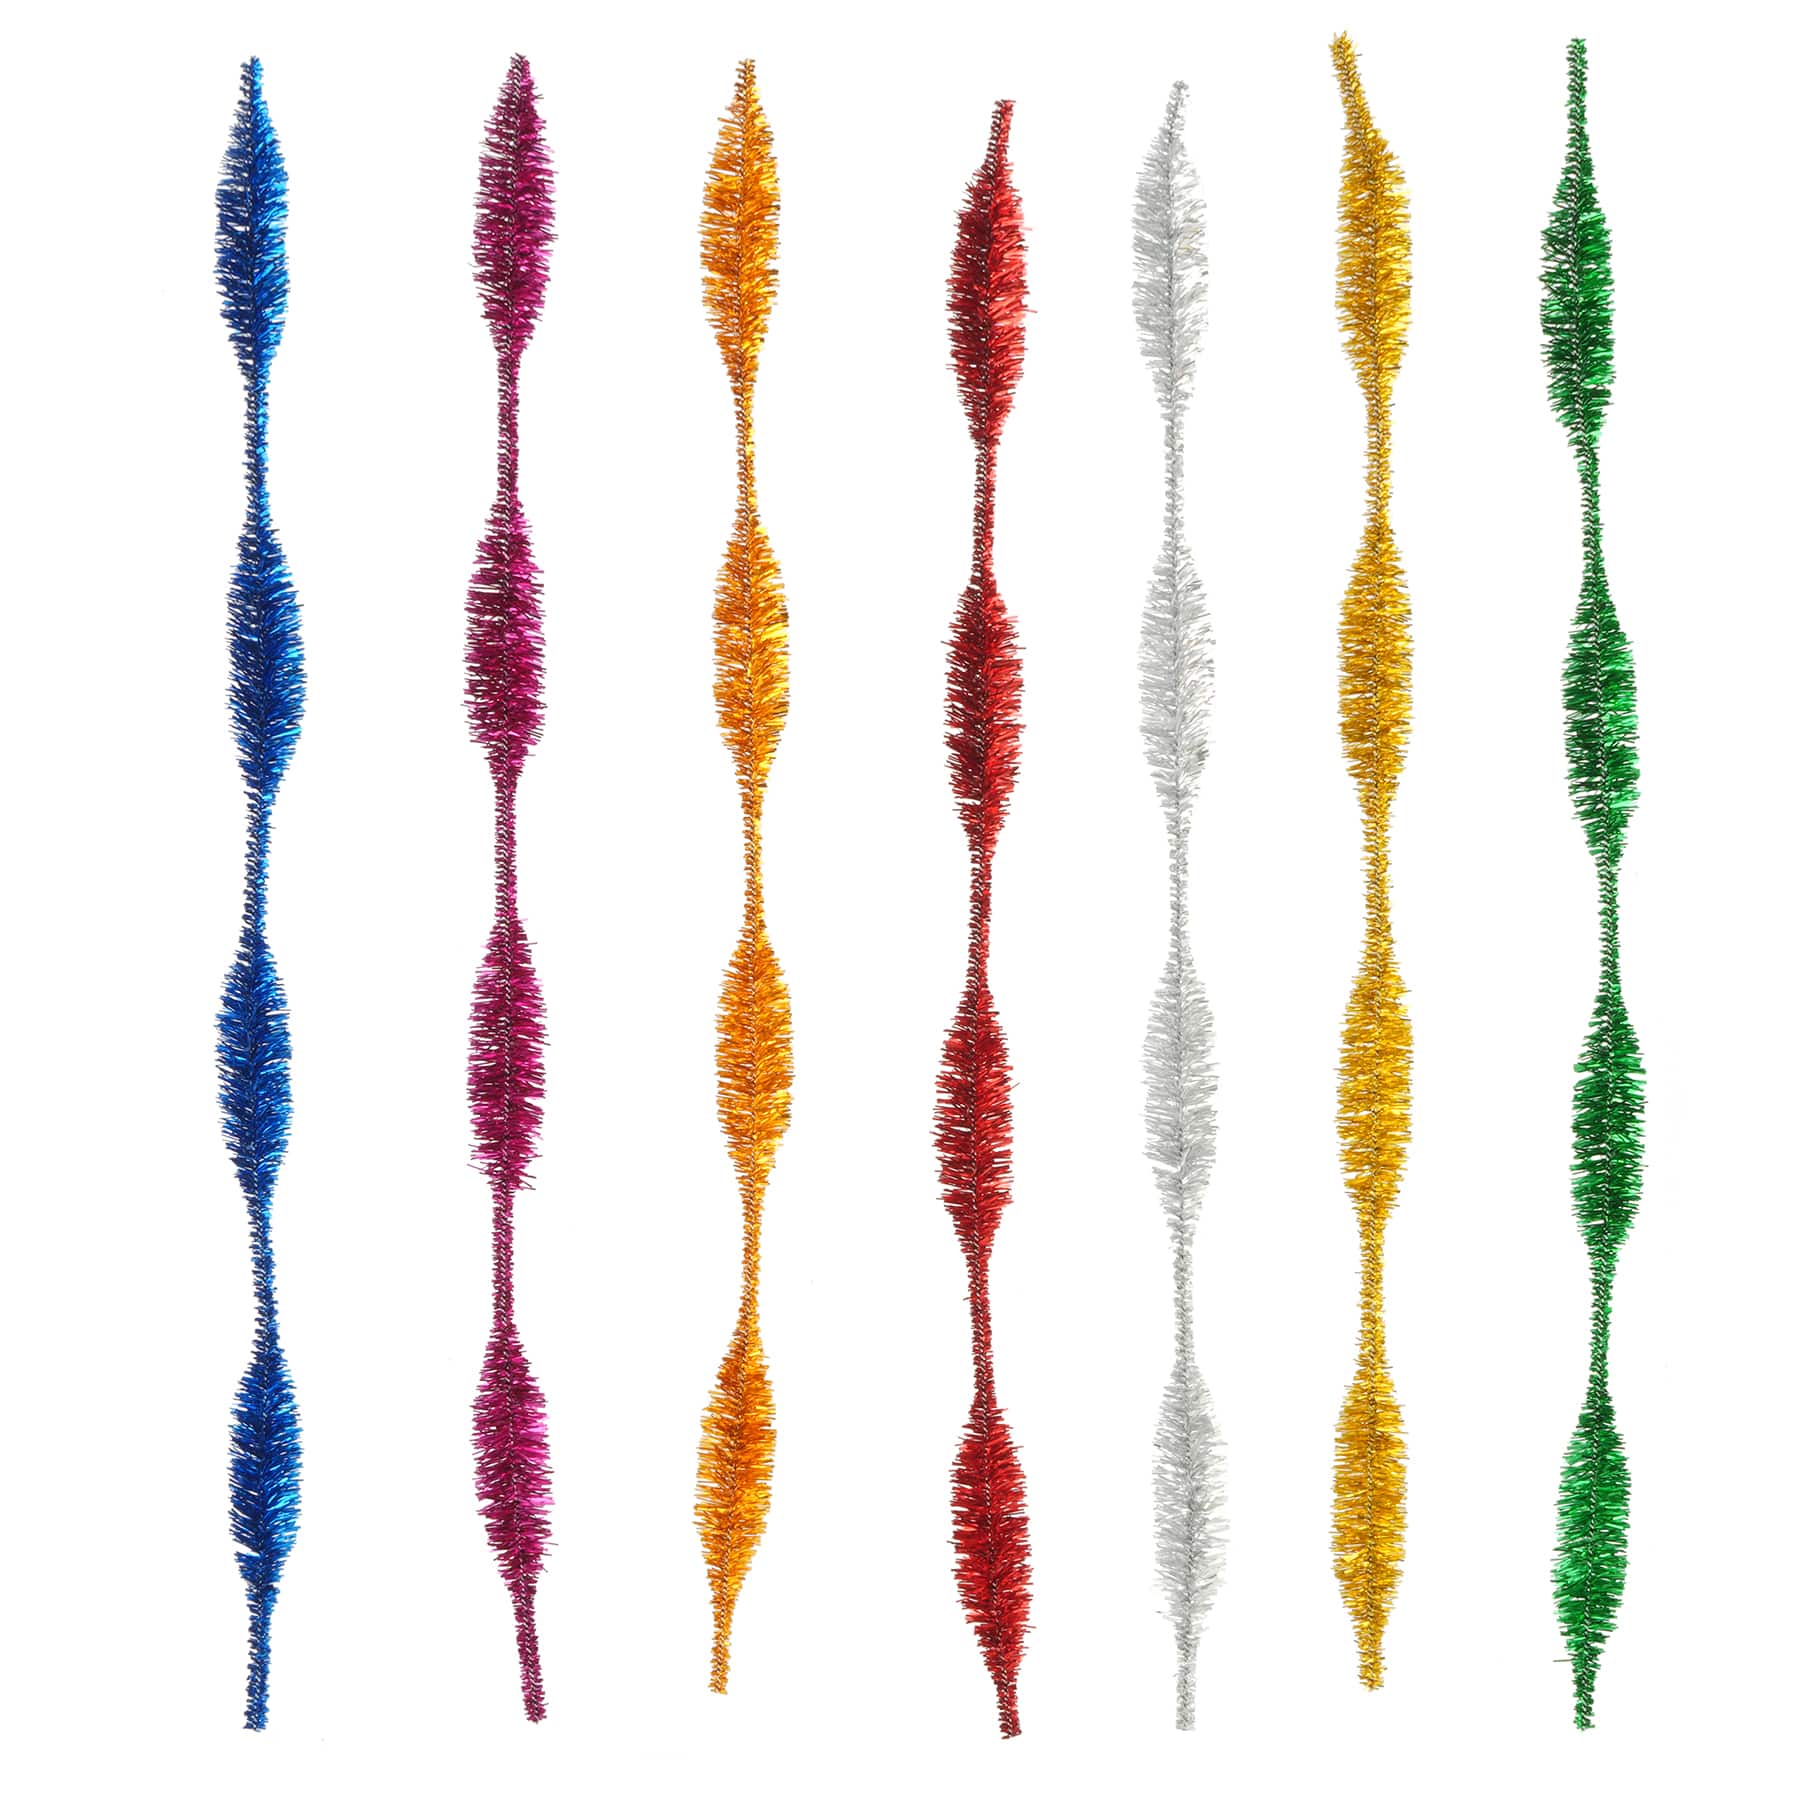 The Crafts Outlet Chenille Stems, Pipe Cleaner, 12-Inch (30-cm), 50-pc, Mixed Pack